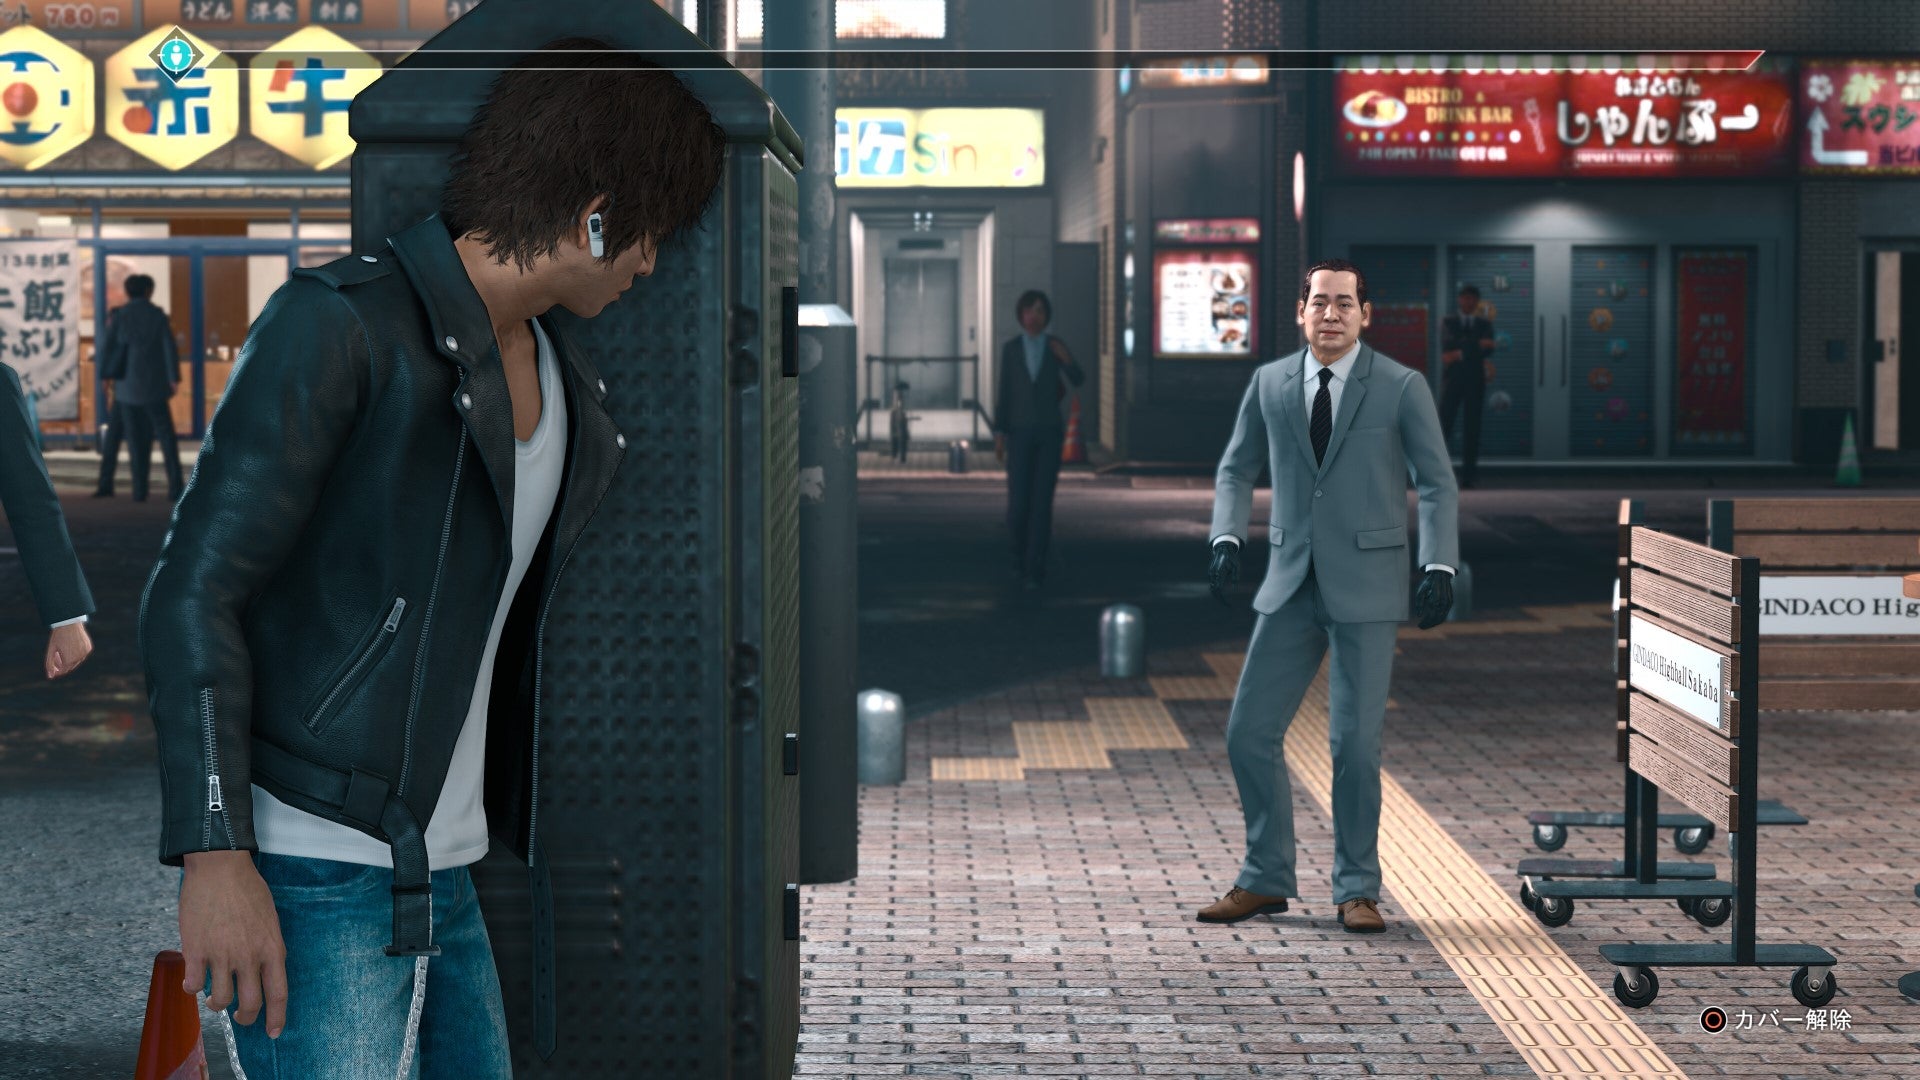 Yagami peers out of cover as he tails a suspect in Judgment.